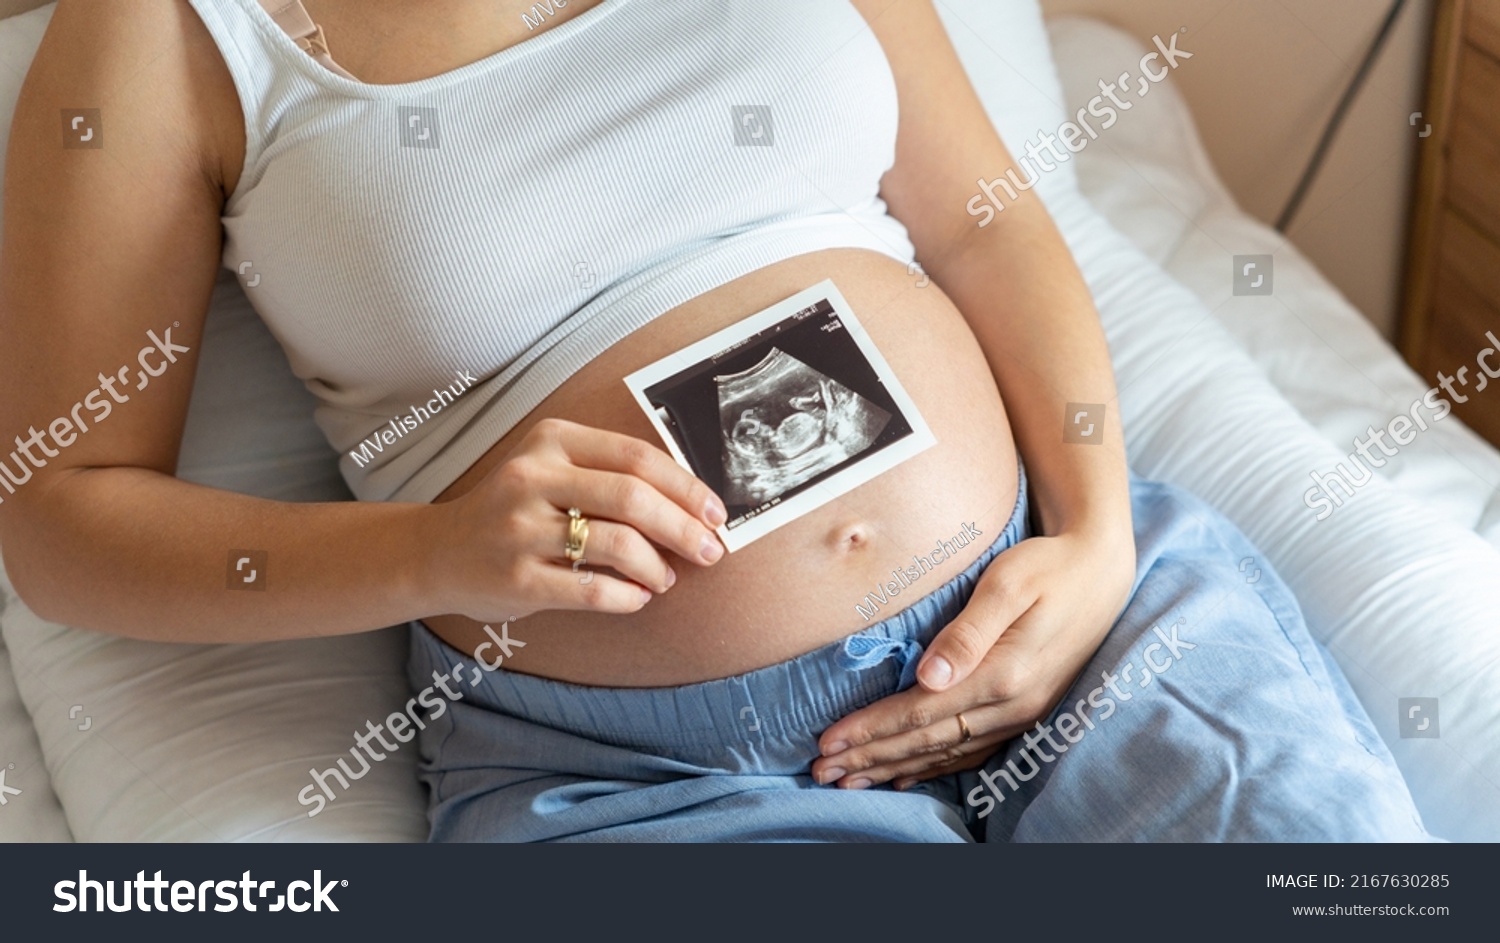 Ultrasound picture pregnant baby photo. Woman holding ultrasound pregnancy image. Concept of pregnancy, maternity, expectation for baby birth #2167630285